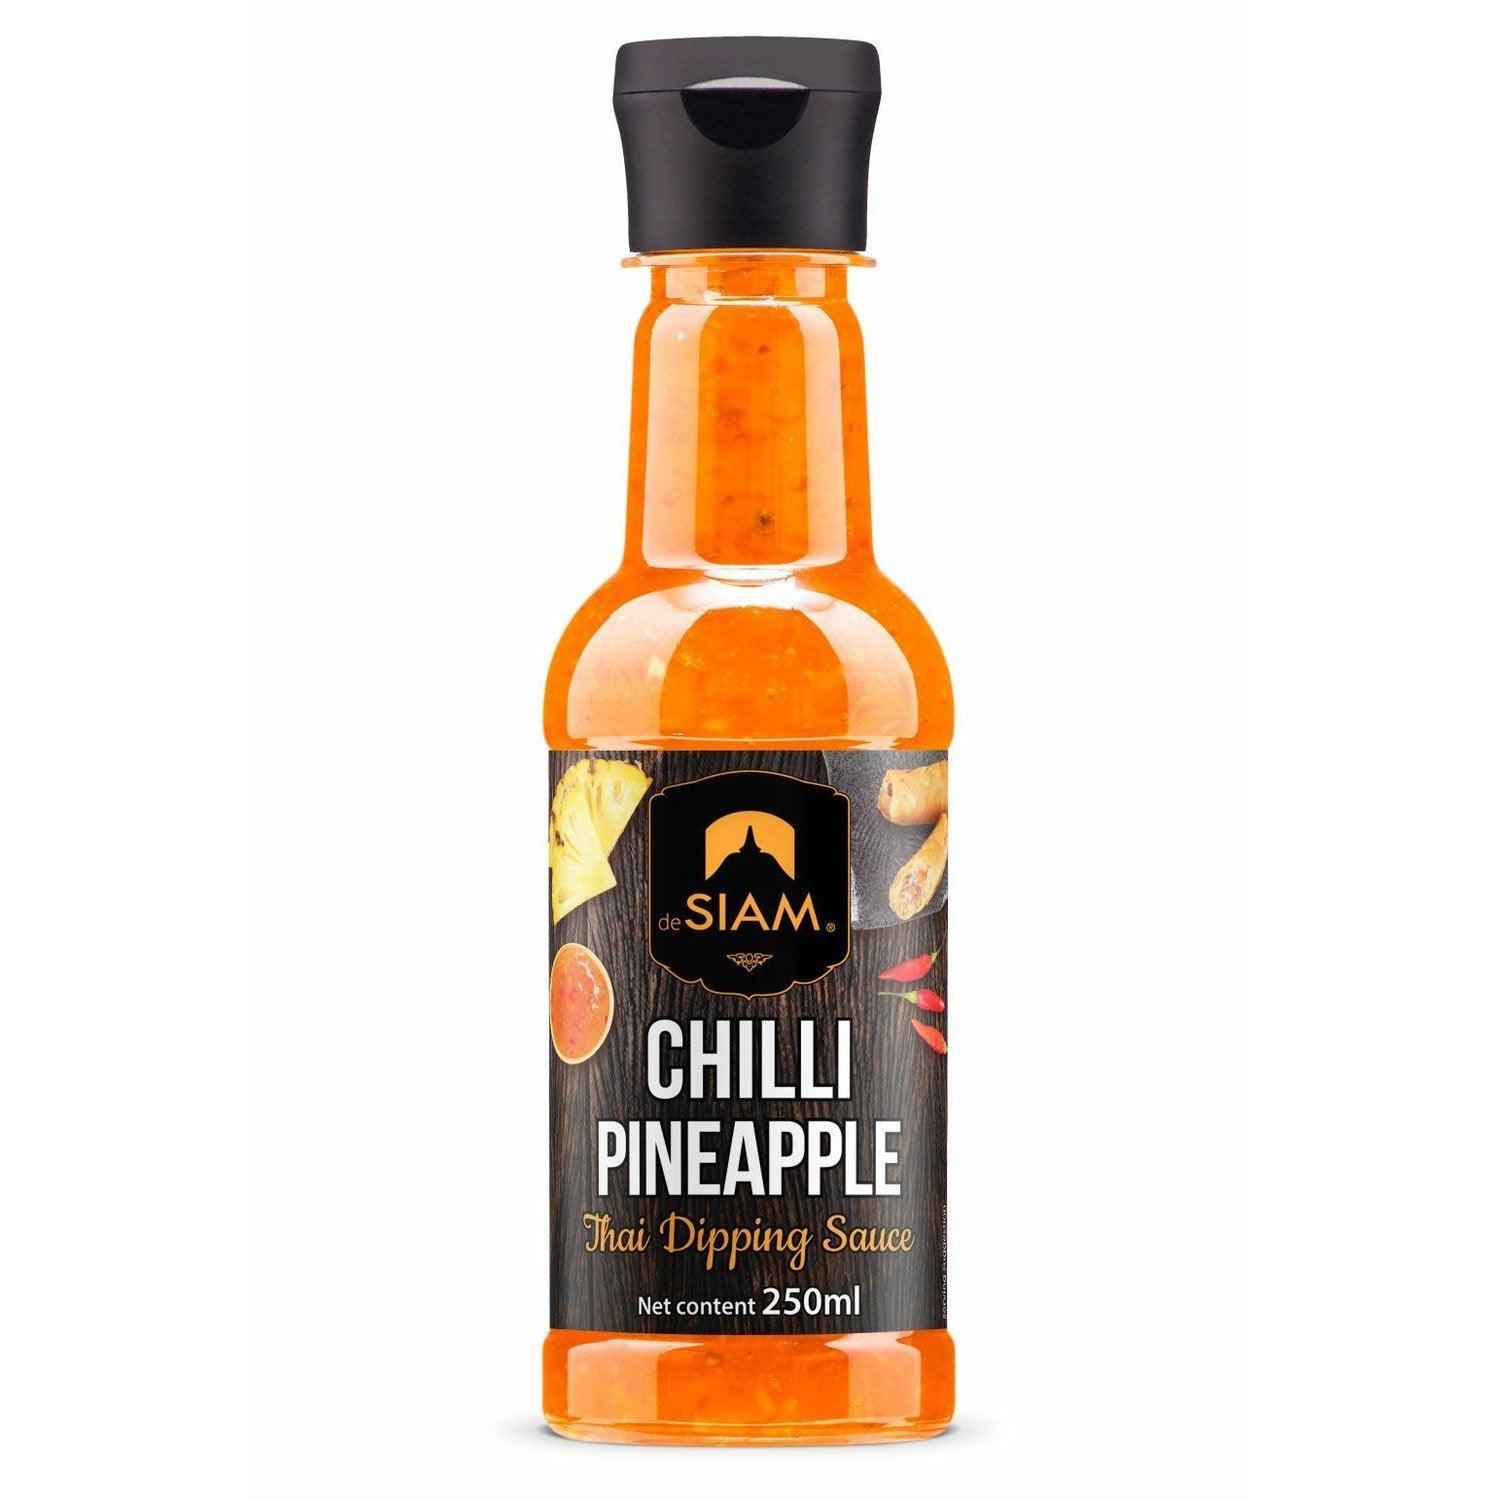 Chilli Pineapple Dipping Sauce